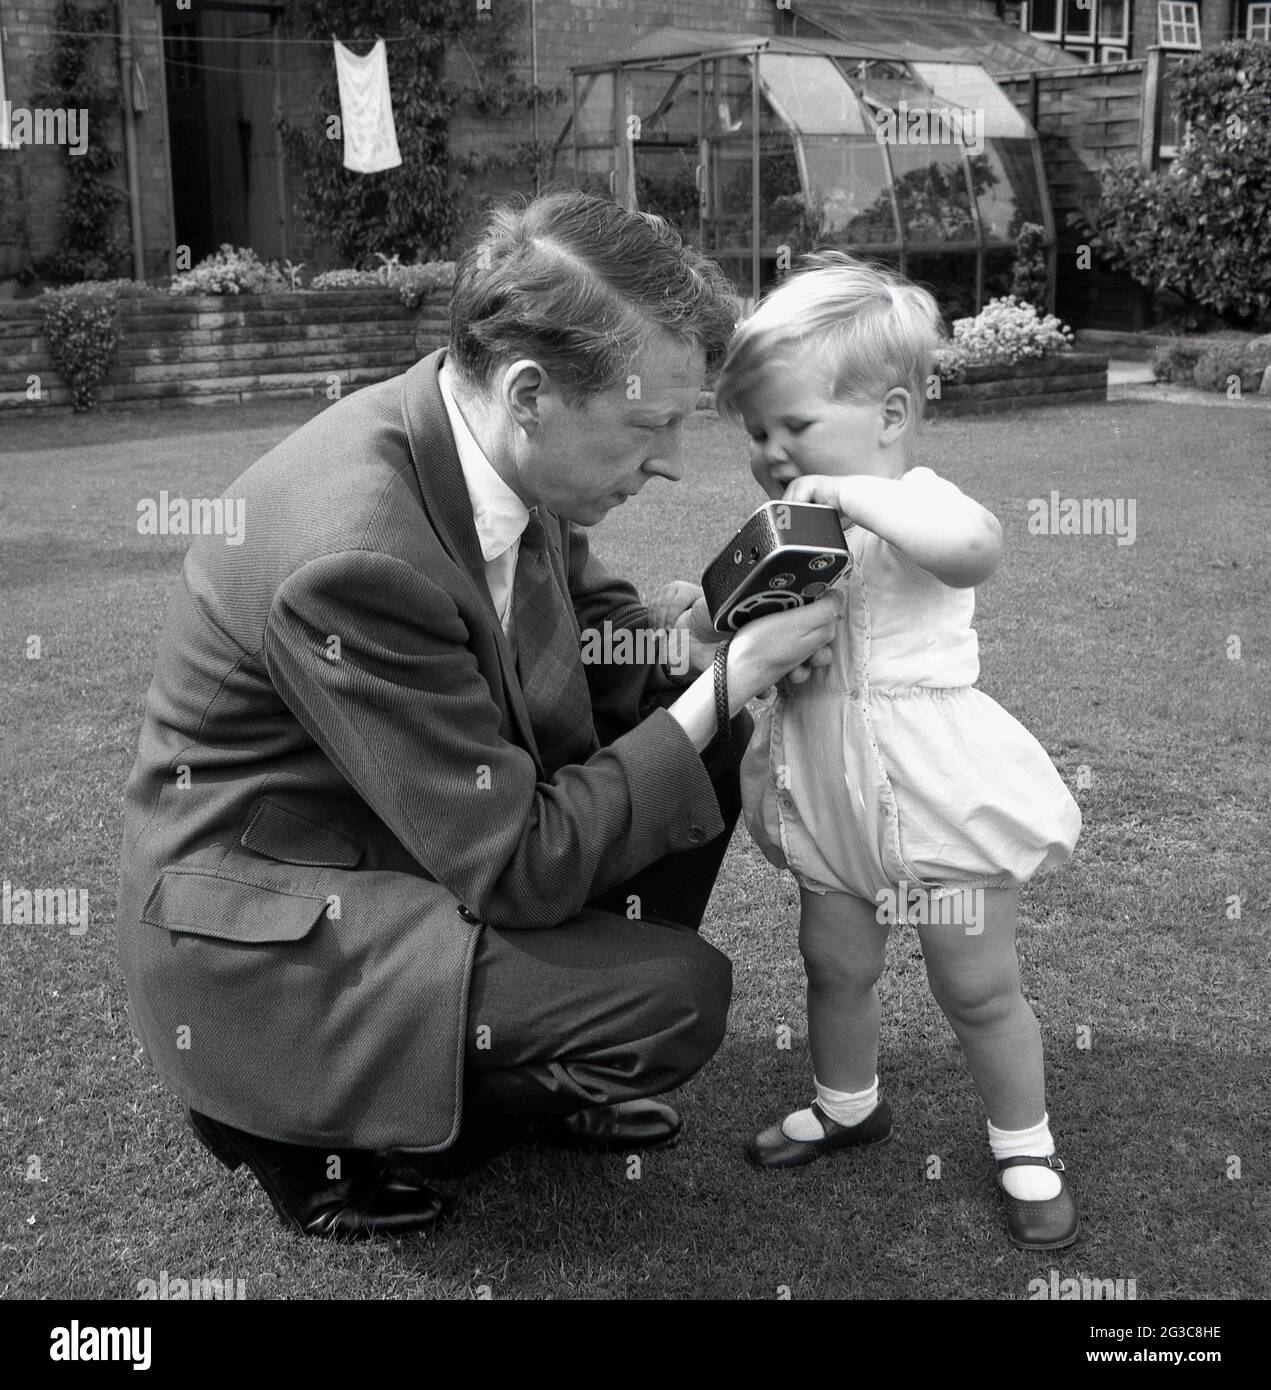 1950s, historical, outside in a back garden, a father, in a suit and tie, kneeling down, showing his infant son, his small hand-held, 8mm cine camera, England, UK. Such lightweight cine cameras using 8mm film were a popula hobbyr in this era, used to make what were known as 'home movies', filmed records of peoples ordinary lives. Stock Photo